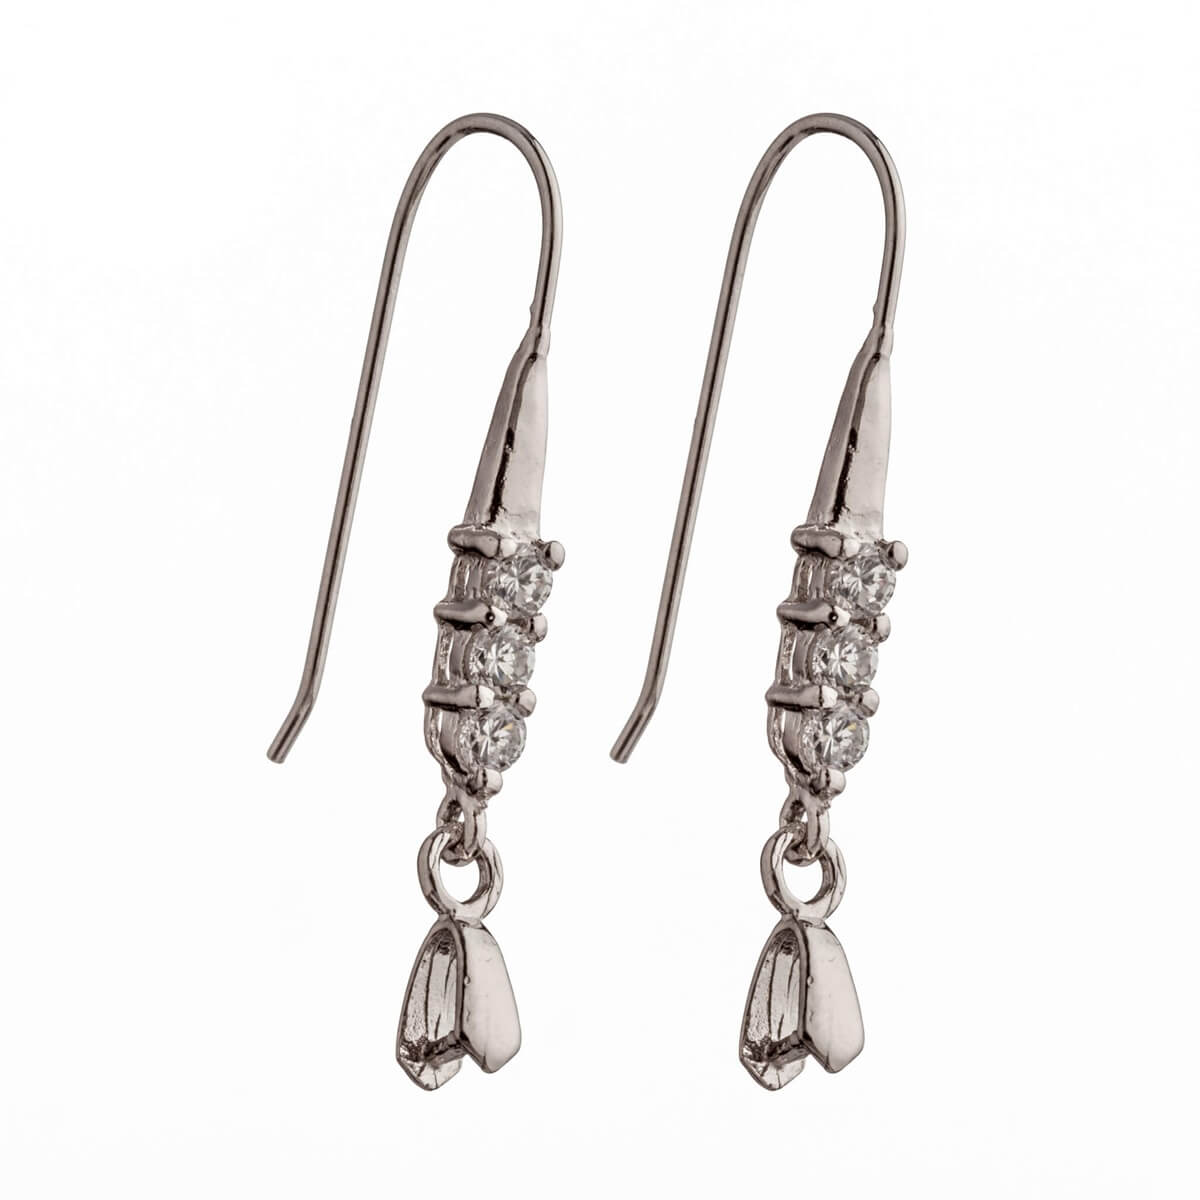 Ear Wires with Cubic Zirconia Inlays and Pinch Bail in Sterling Silver 21 Gauge 